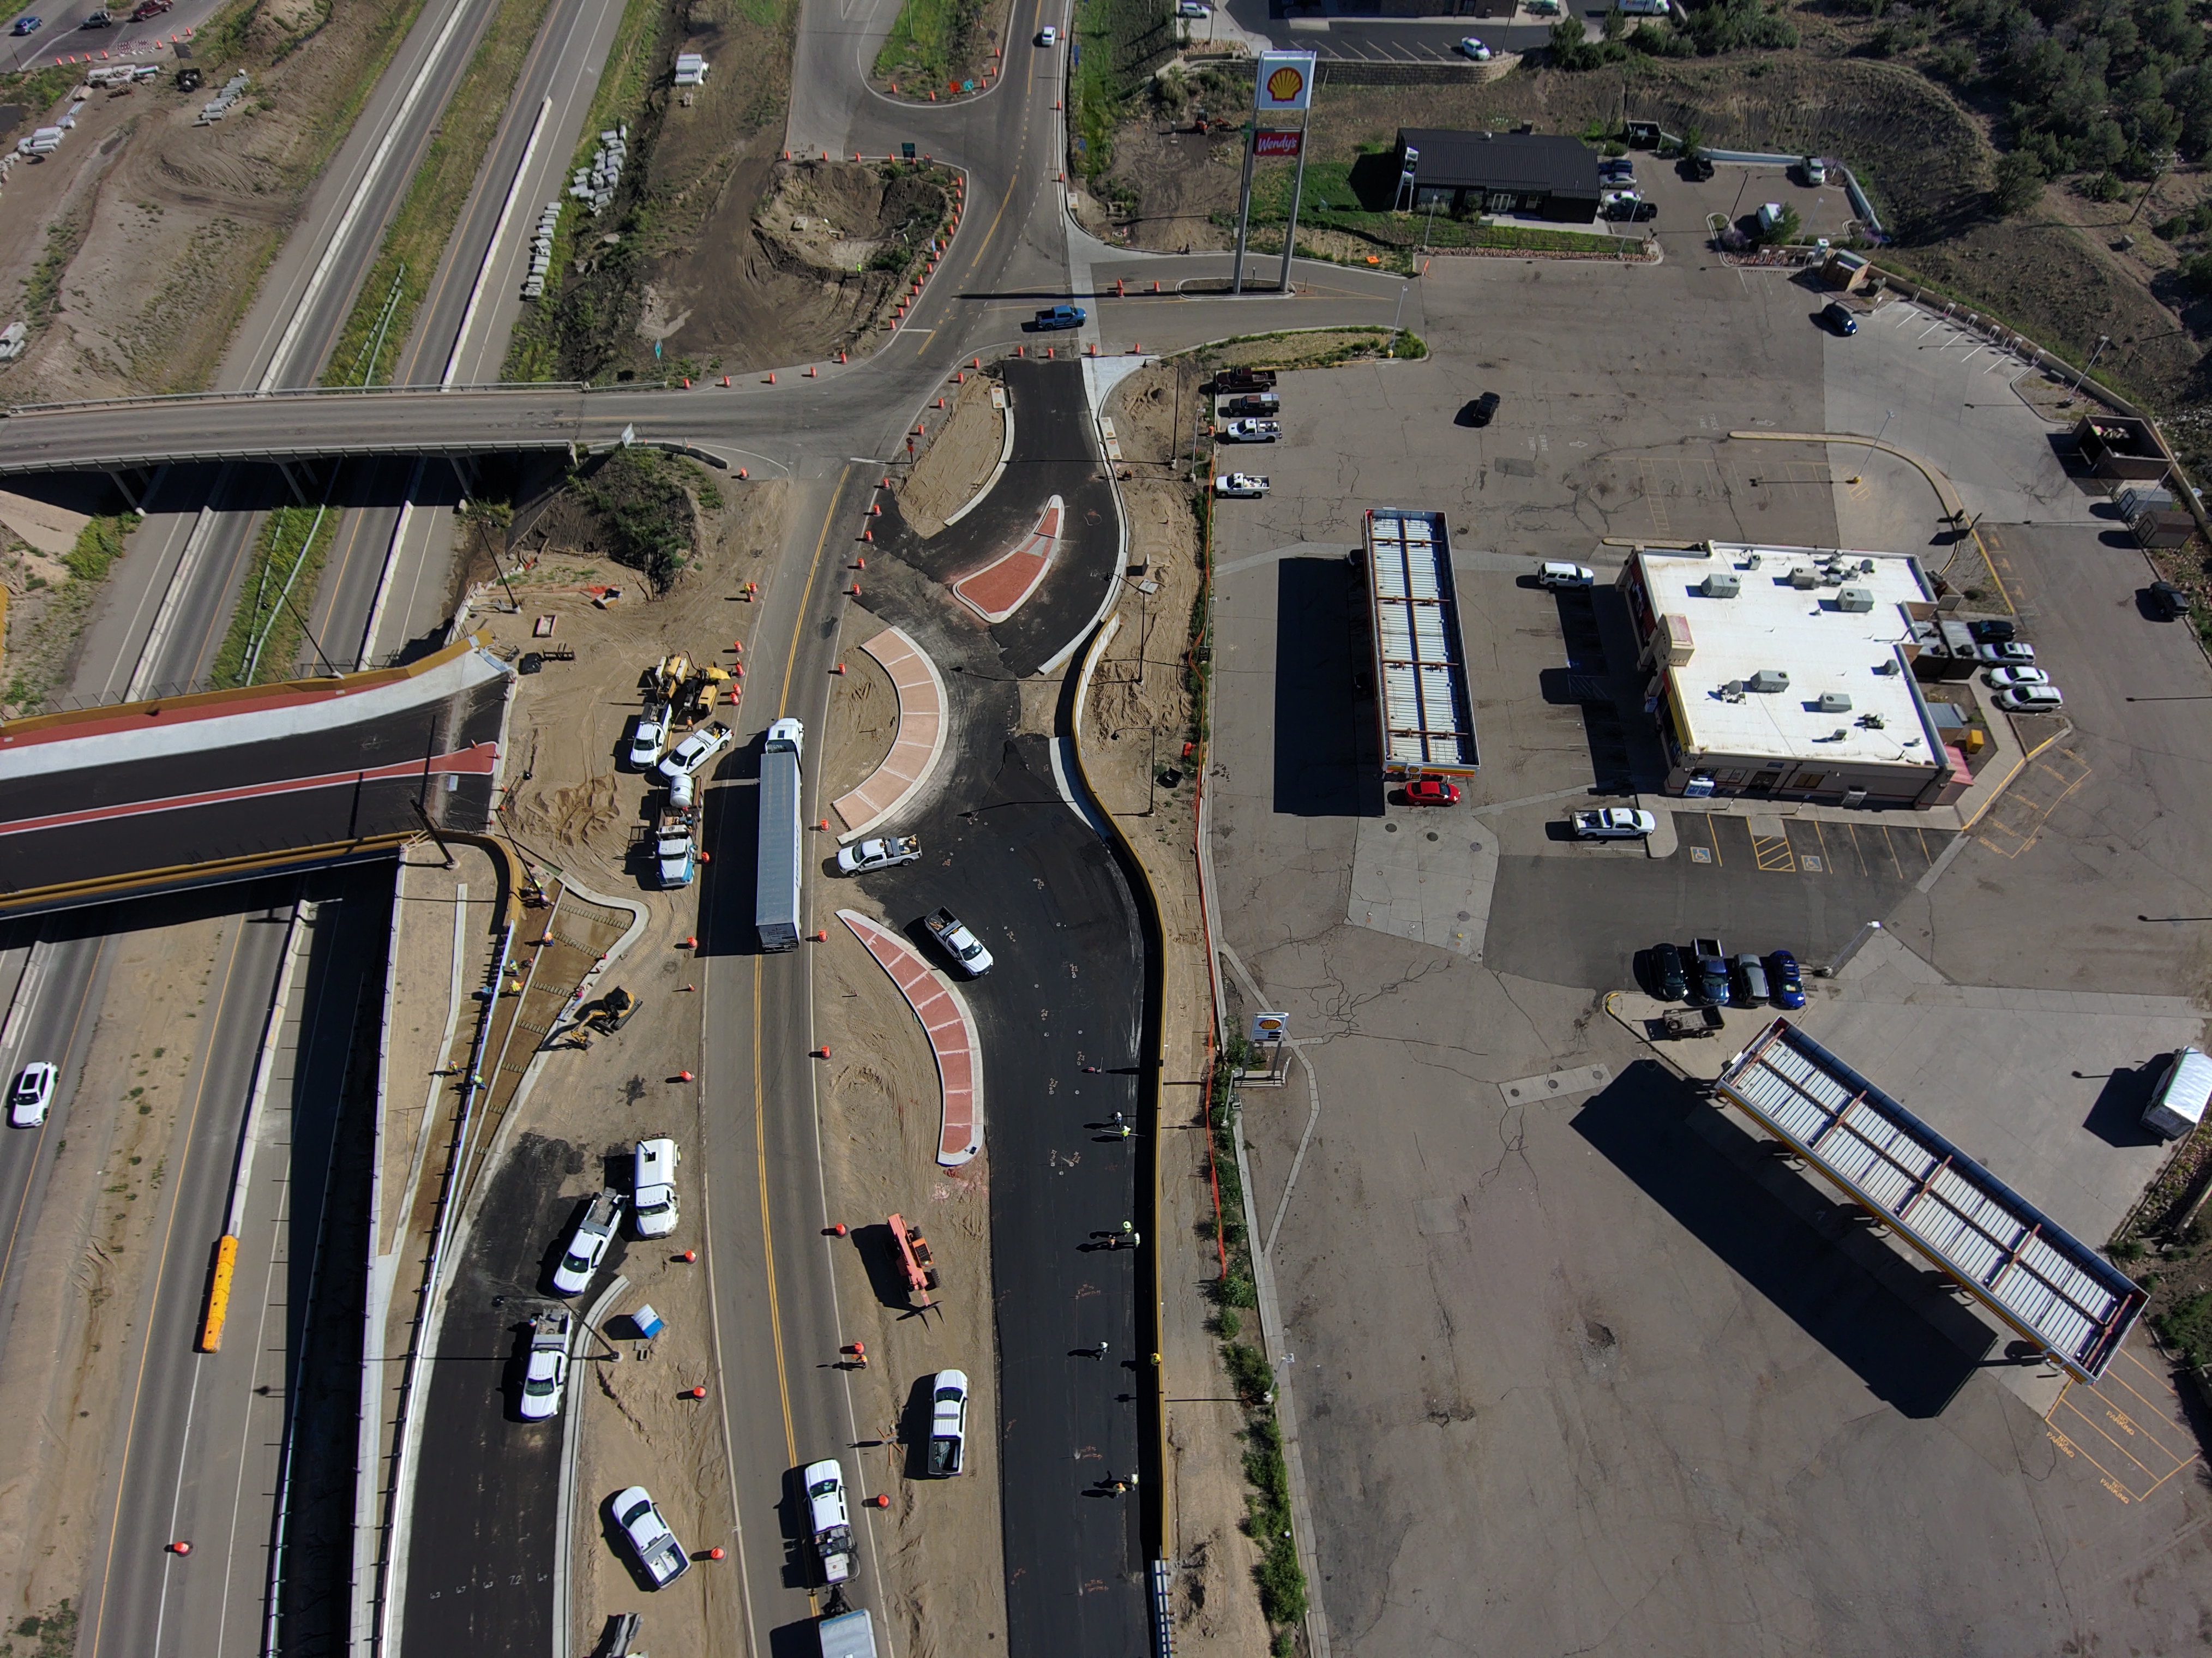 closeup drone view east side roundabout.JPG detail image